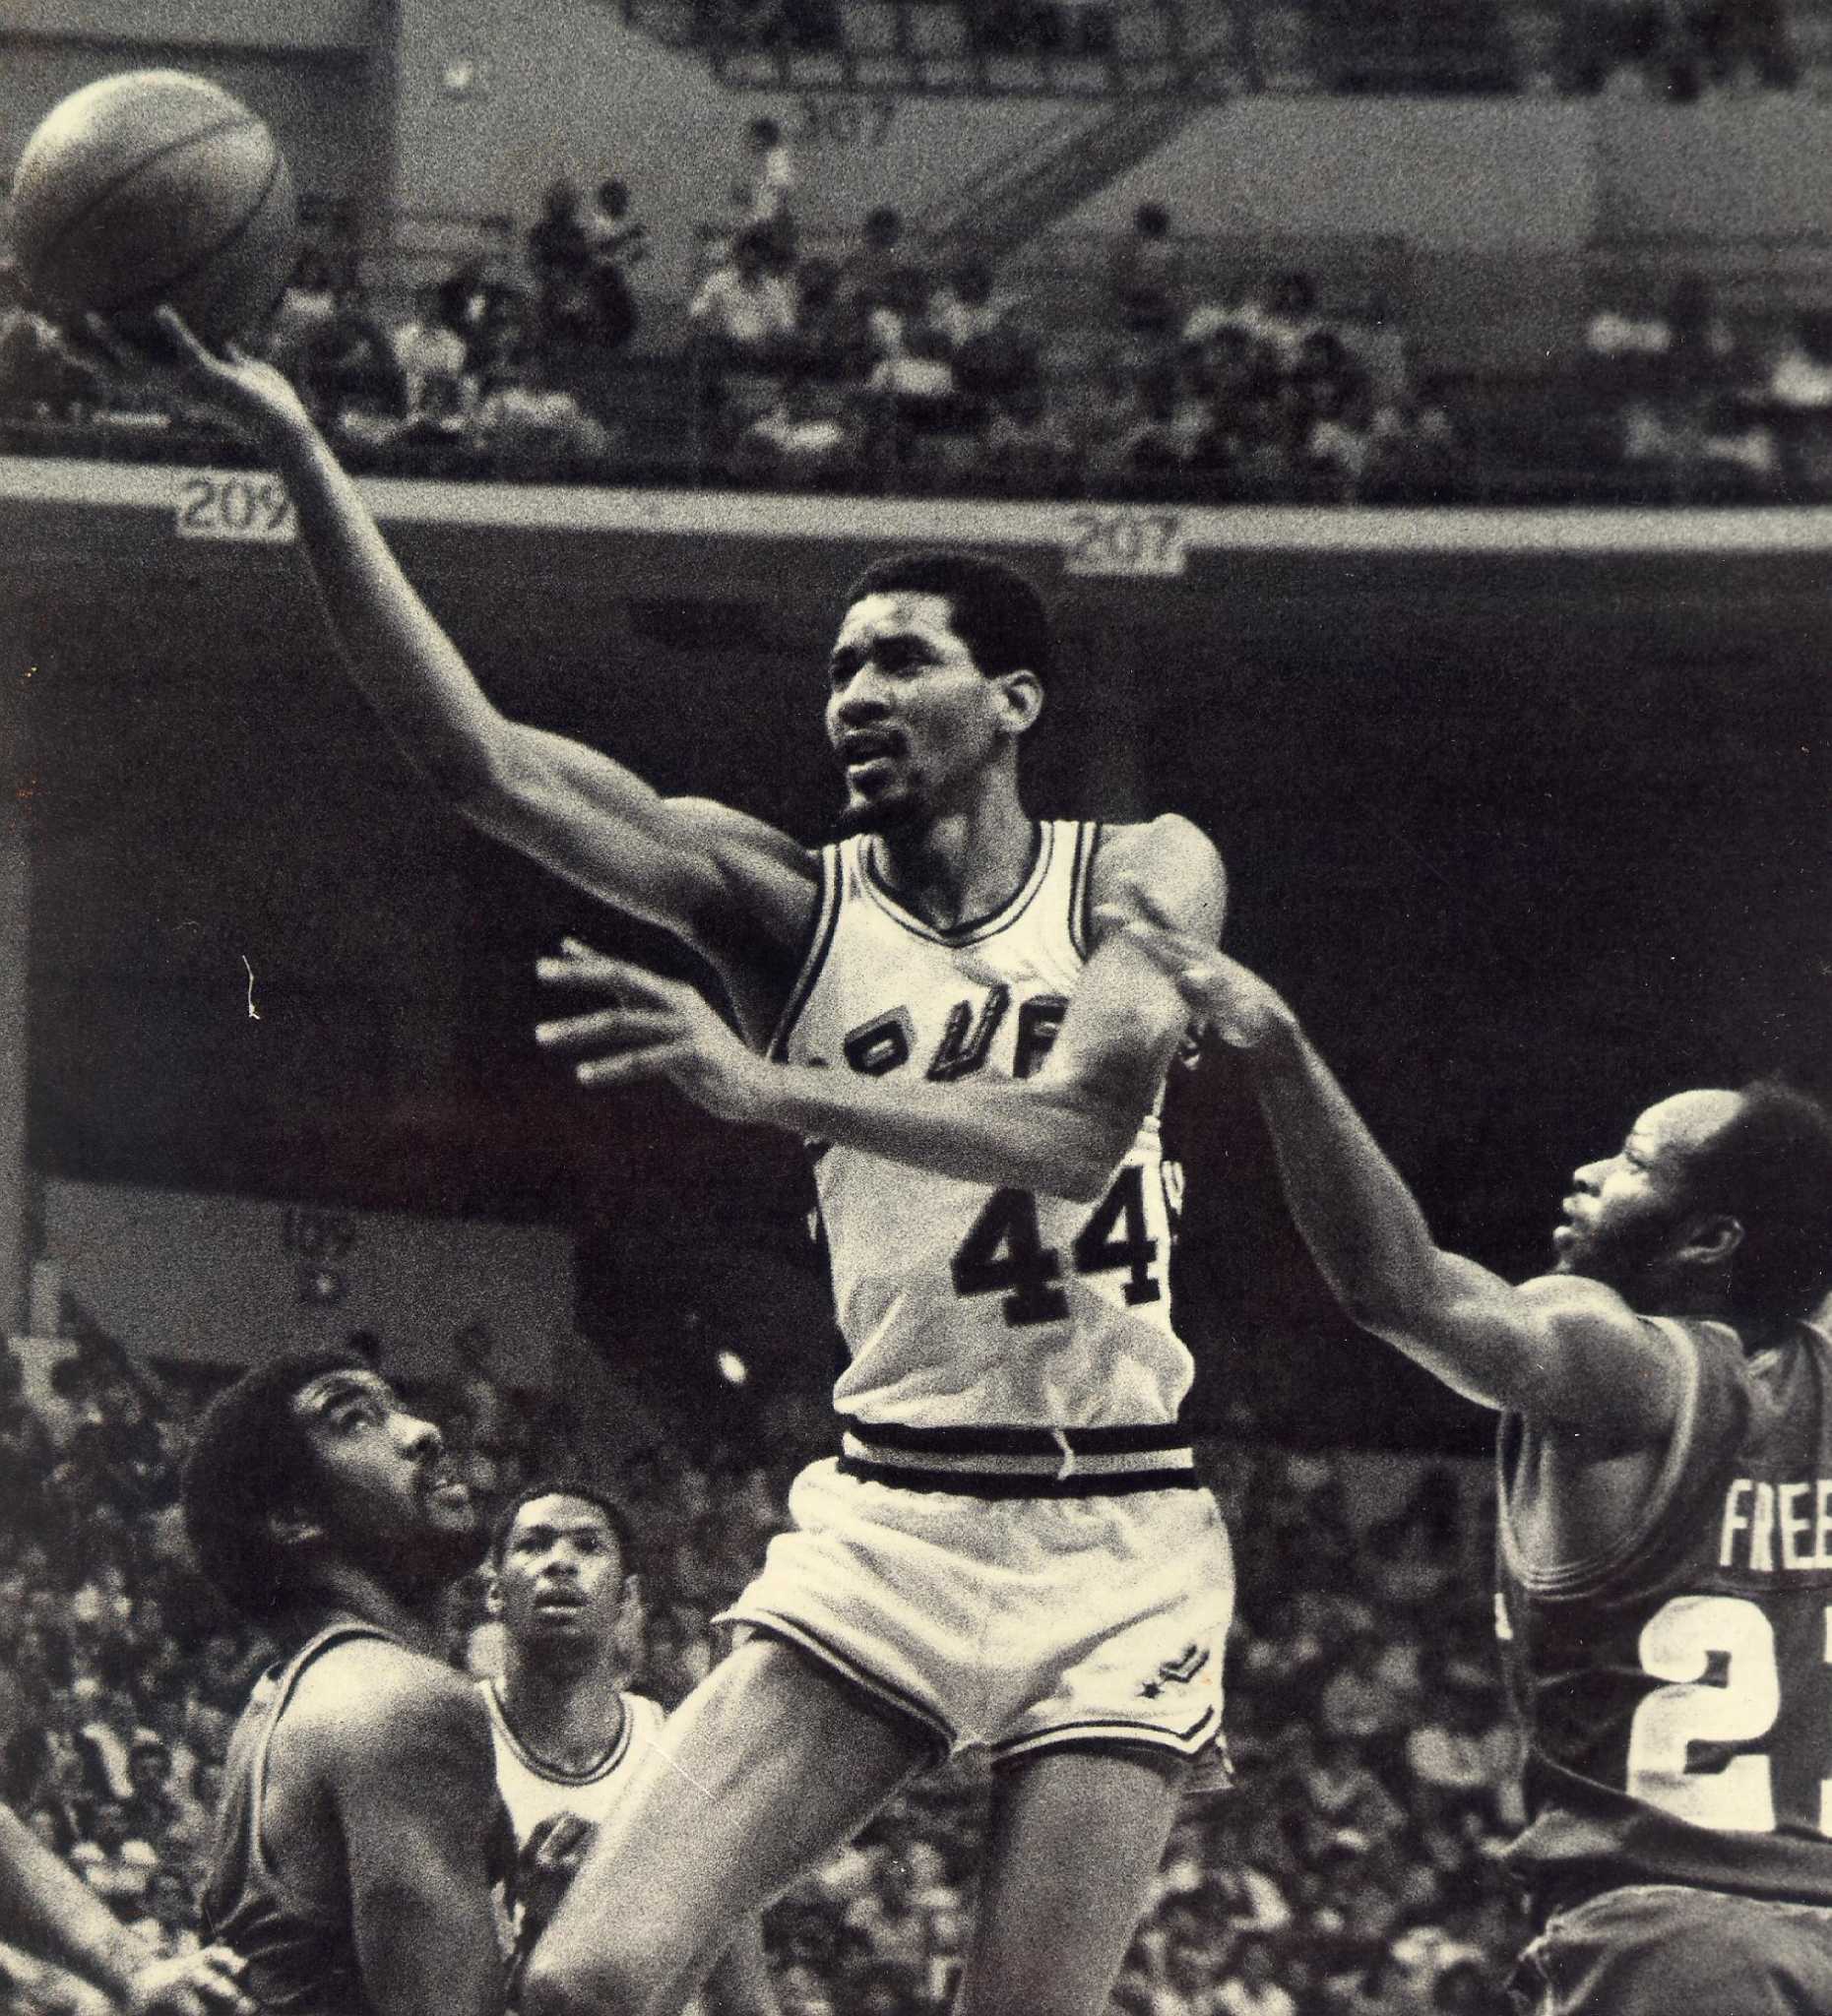 Spurs great George Gervin speaks about Nike poster, clothing line